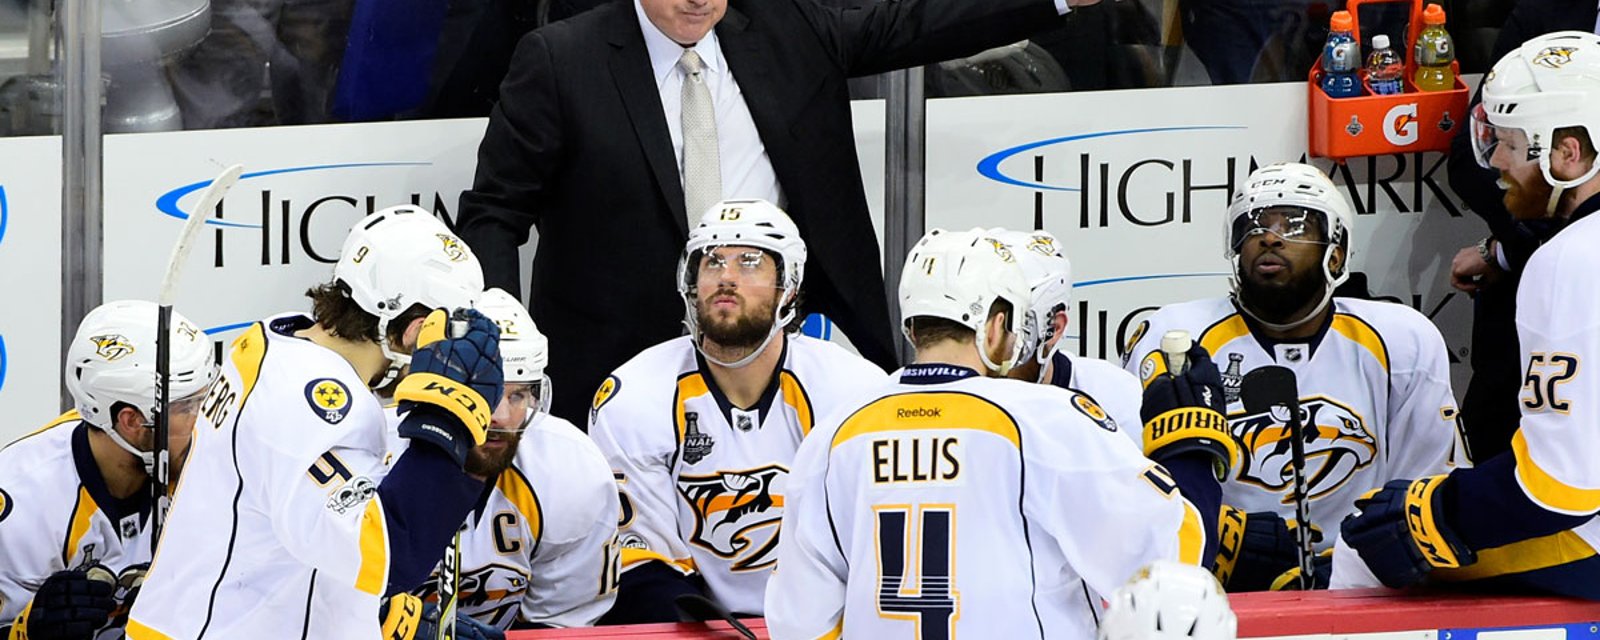 Breaking: NHL insider uncovers very surprising fact about the Nashville Predators!